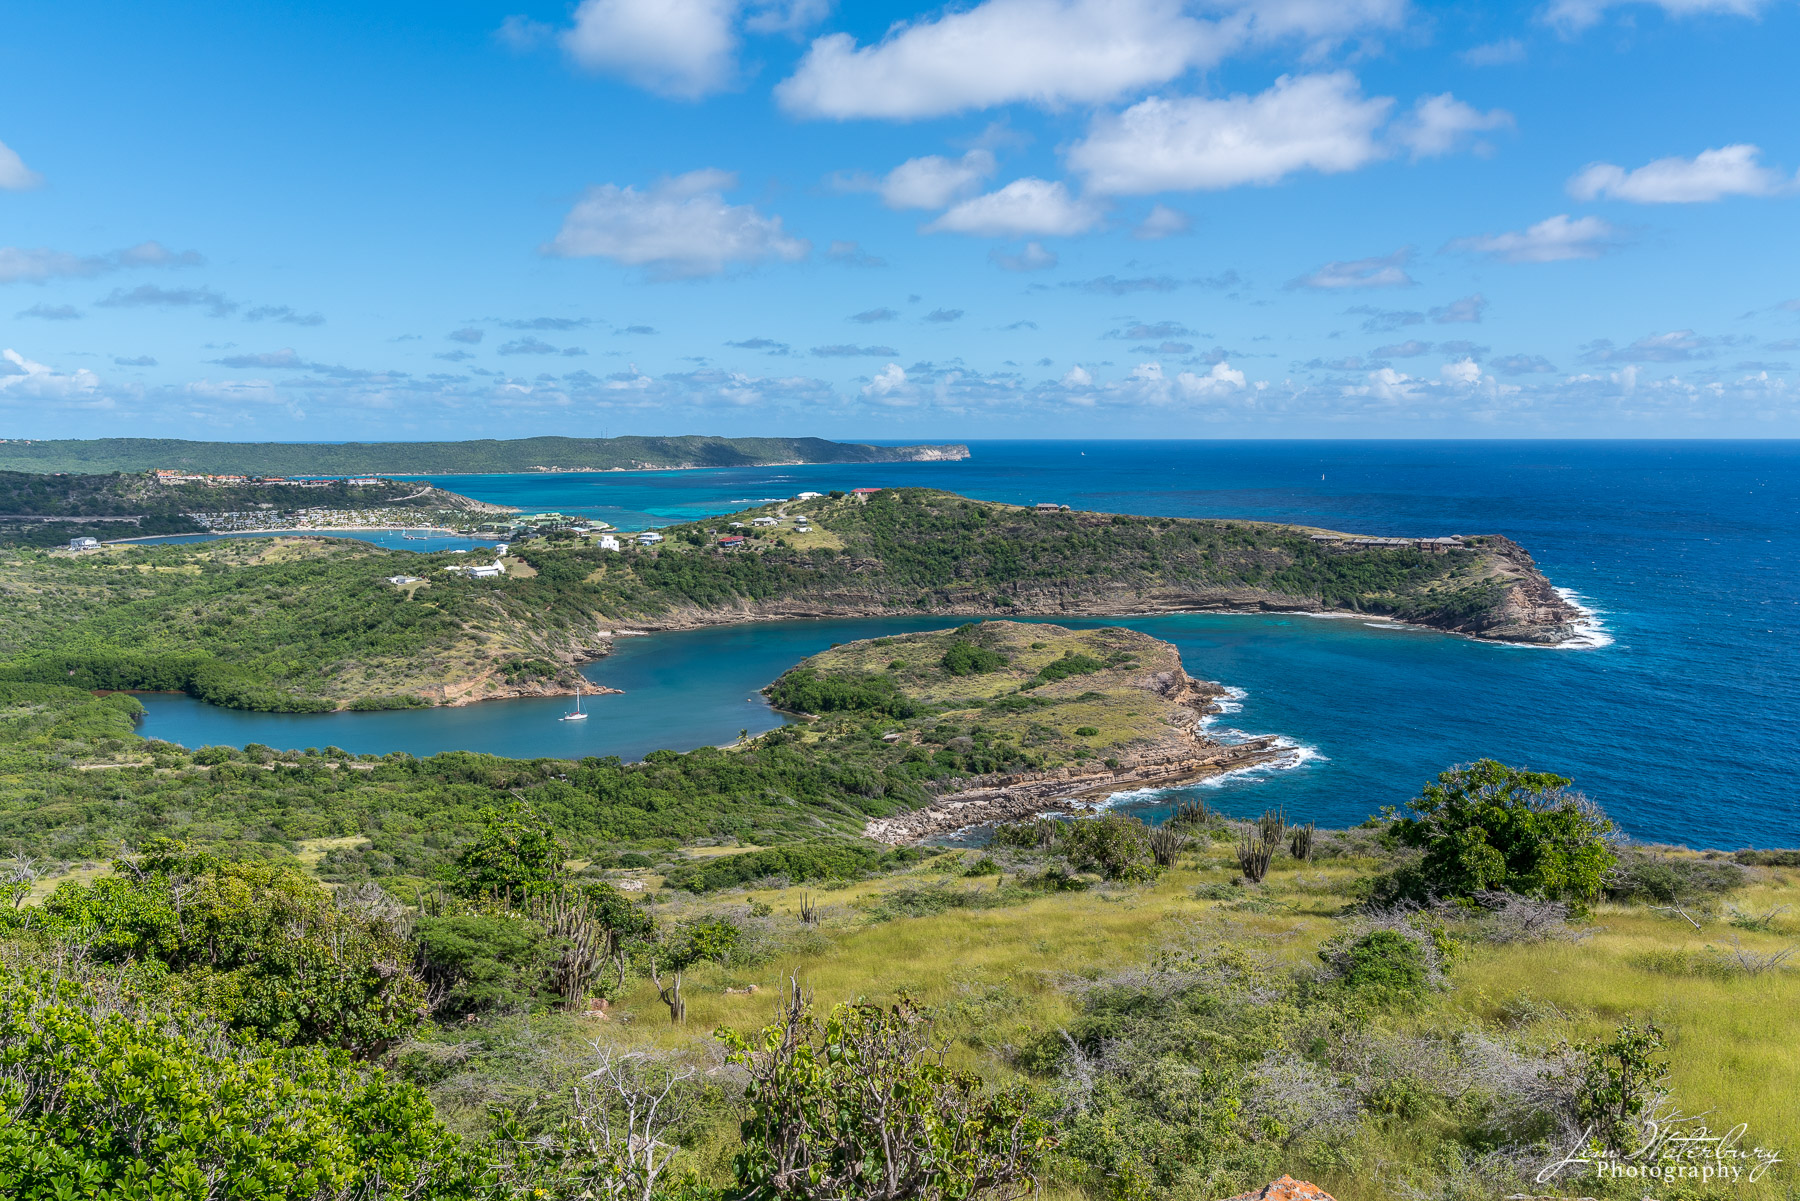 Views of the Atlantic Ocean and Willoughby Bay from an overlook near Blockhouse Fort in Antigua.